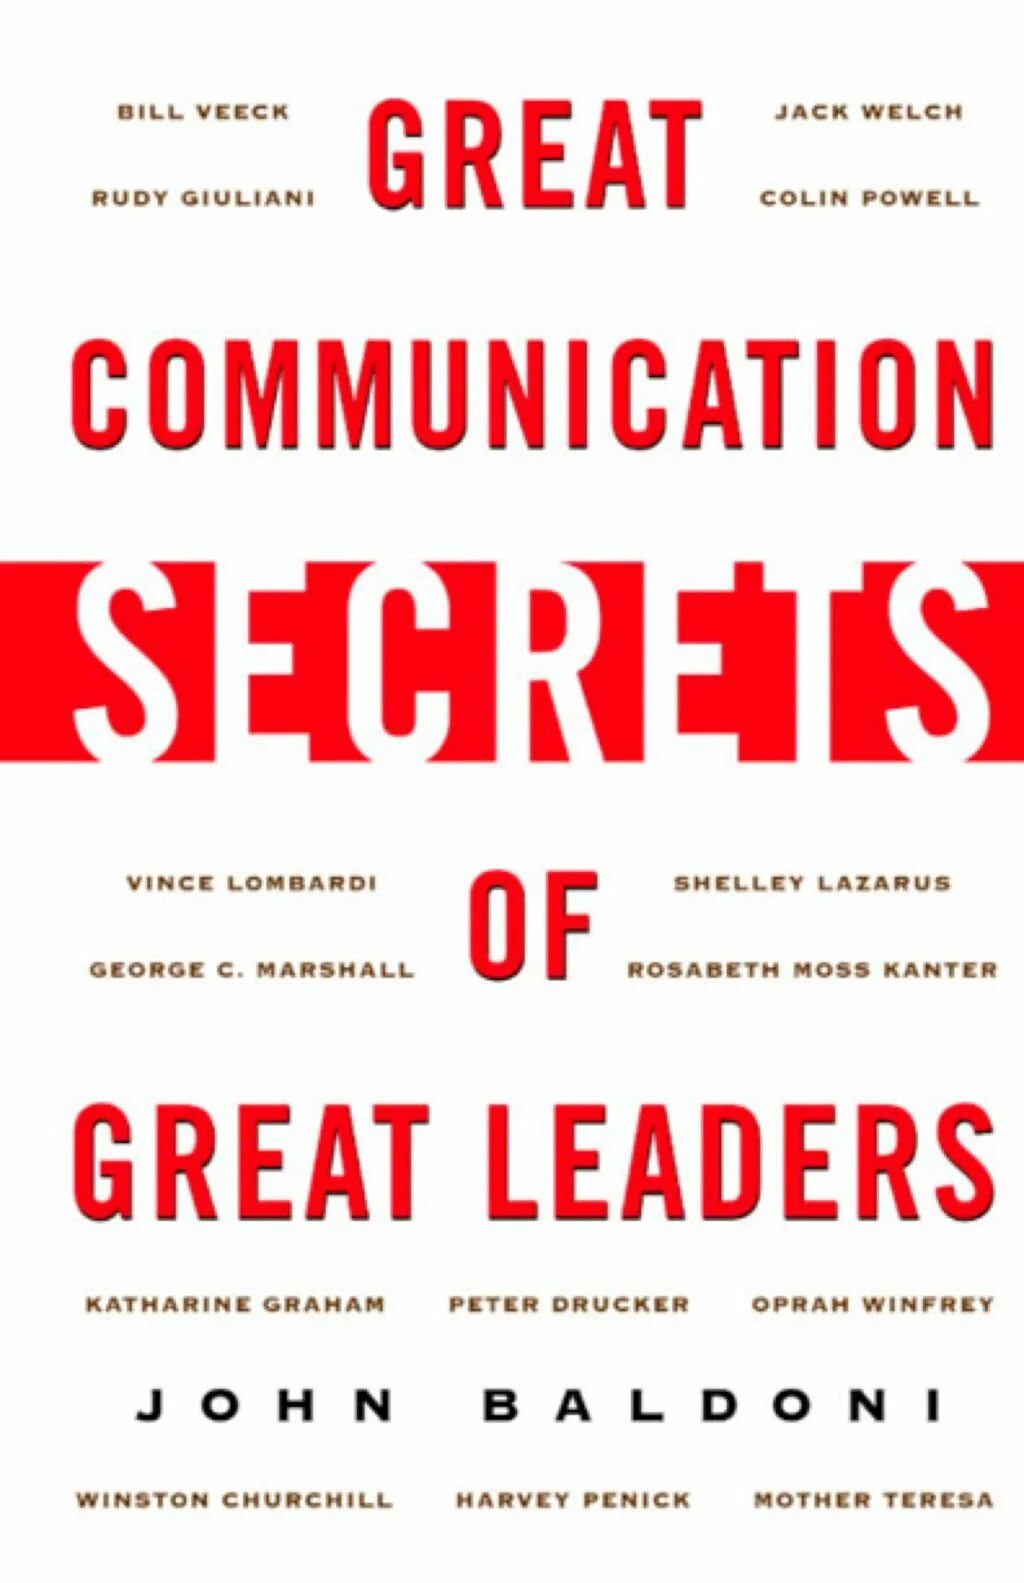 The great communicator. Great leader. Good to great pdf.